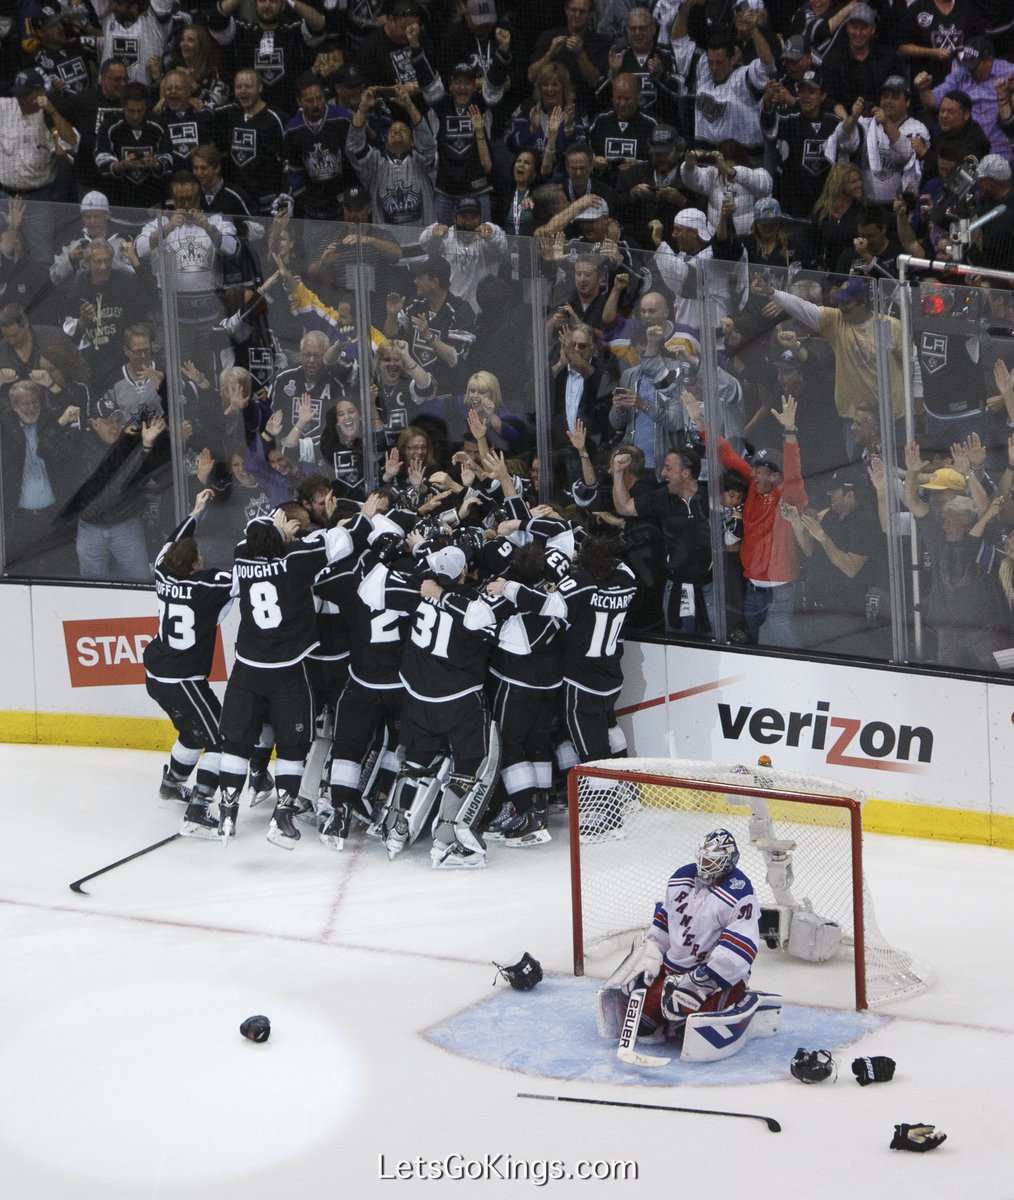 What a night #lakings